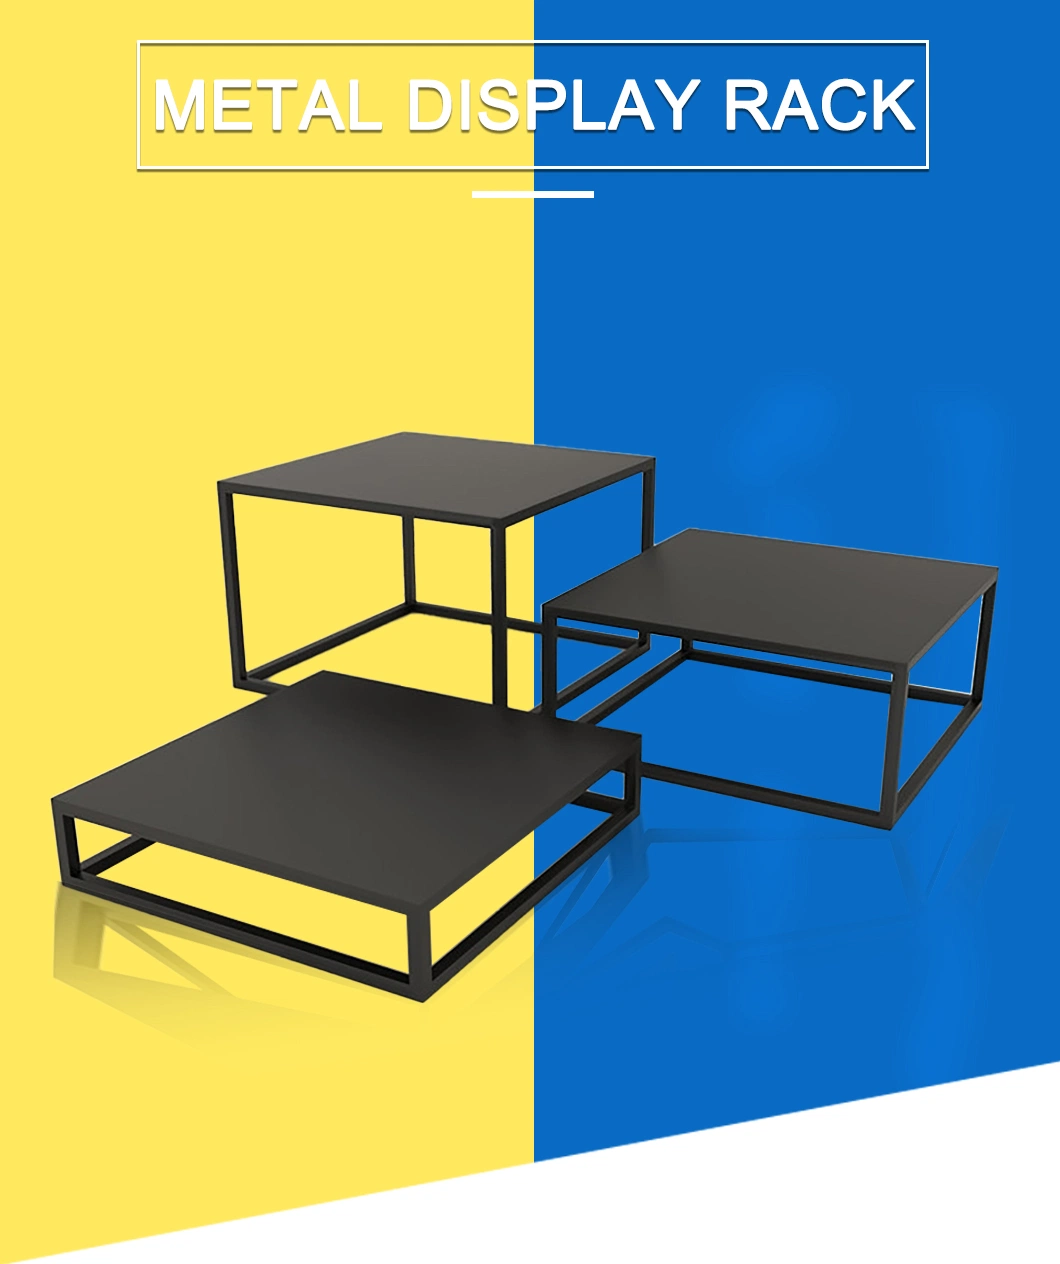 Energy Efficient Metal Display Rack for Conservation